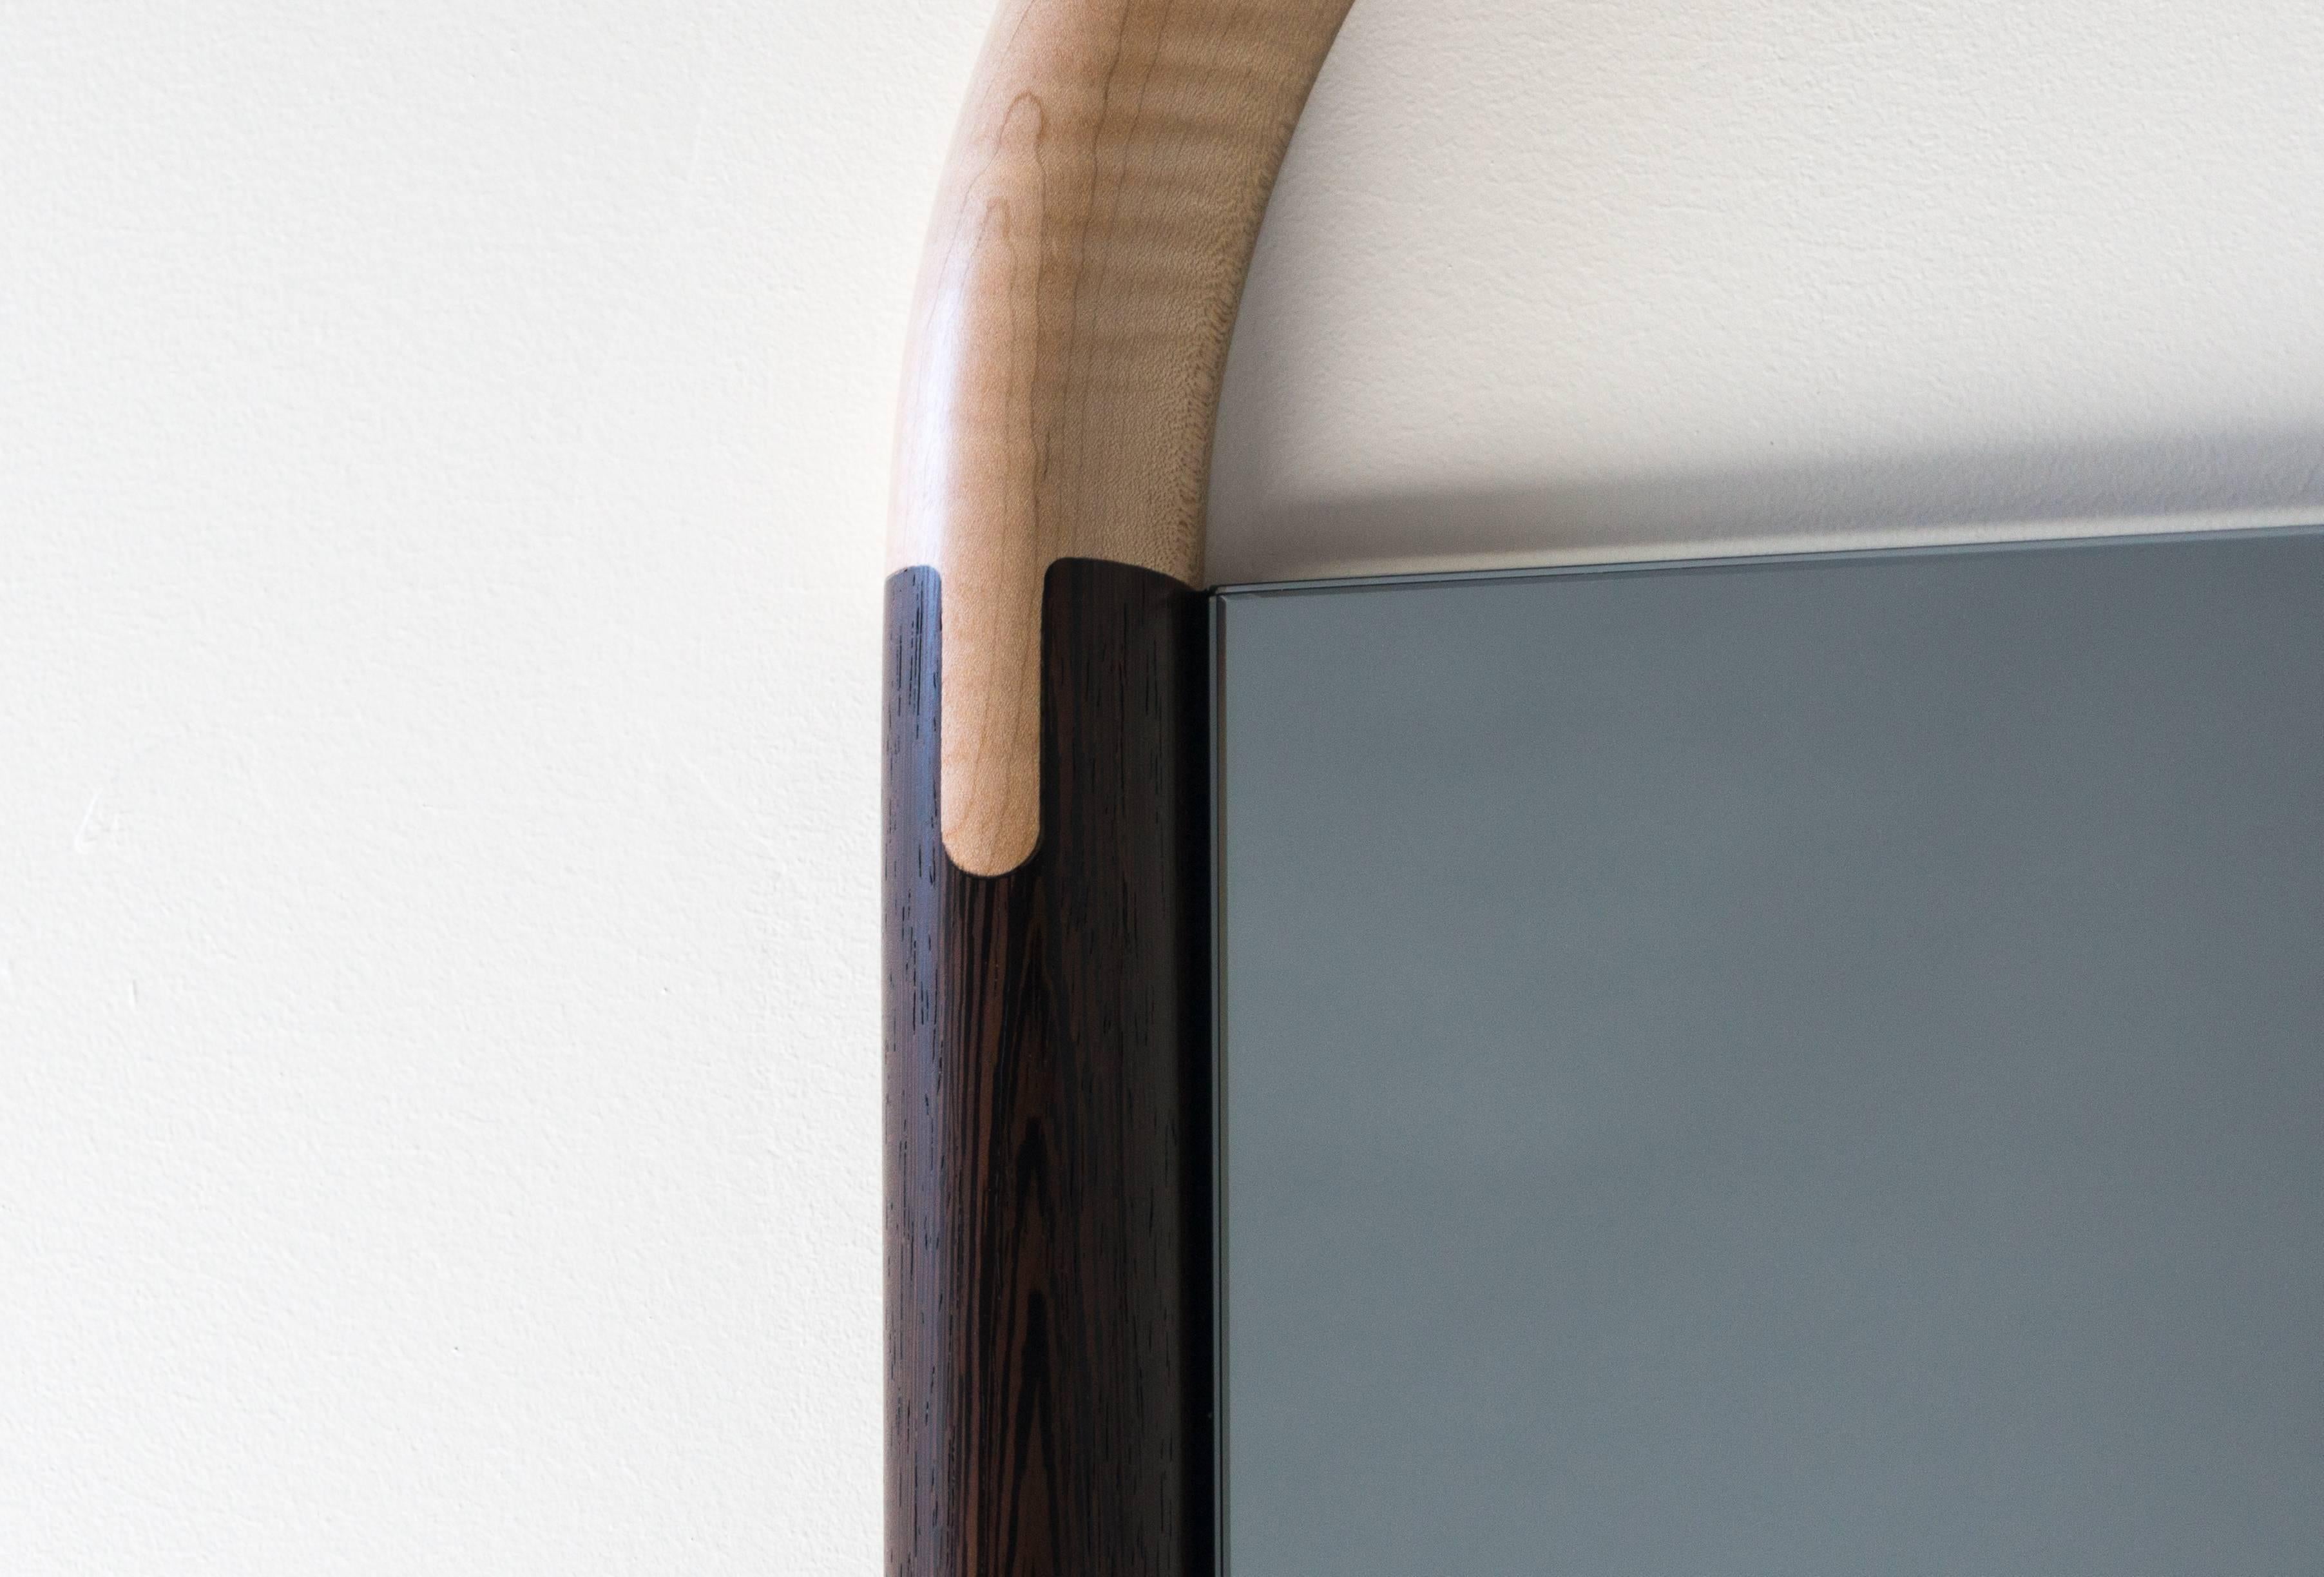 Halo Mirror Wall Mounted Birnam Wood Studio in Cherry and Curly Maple In New Condition For Sale In Ridgewood, NY